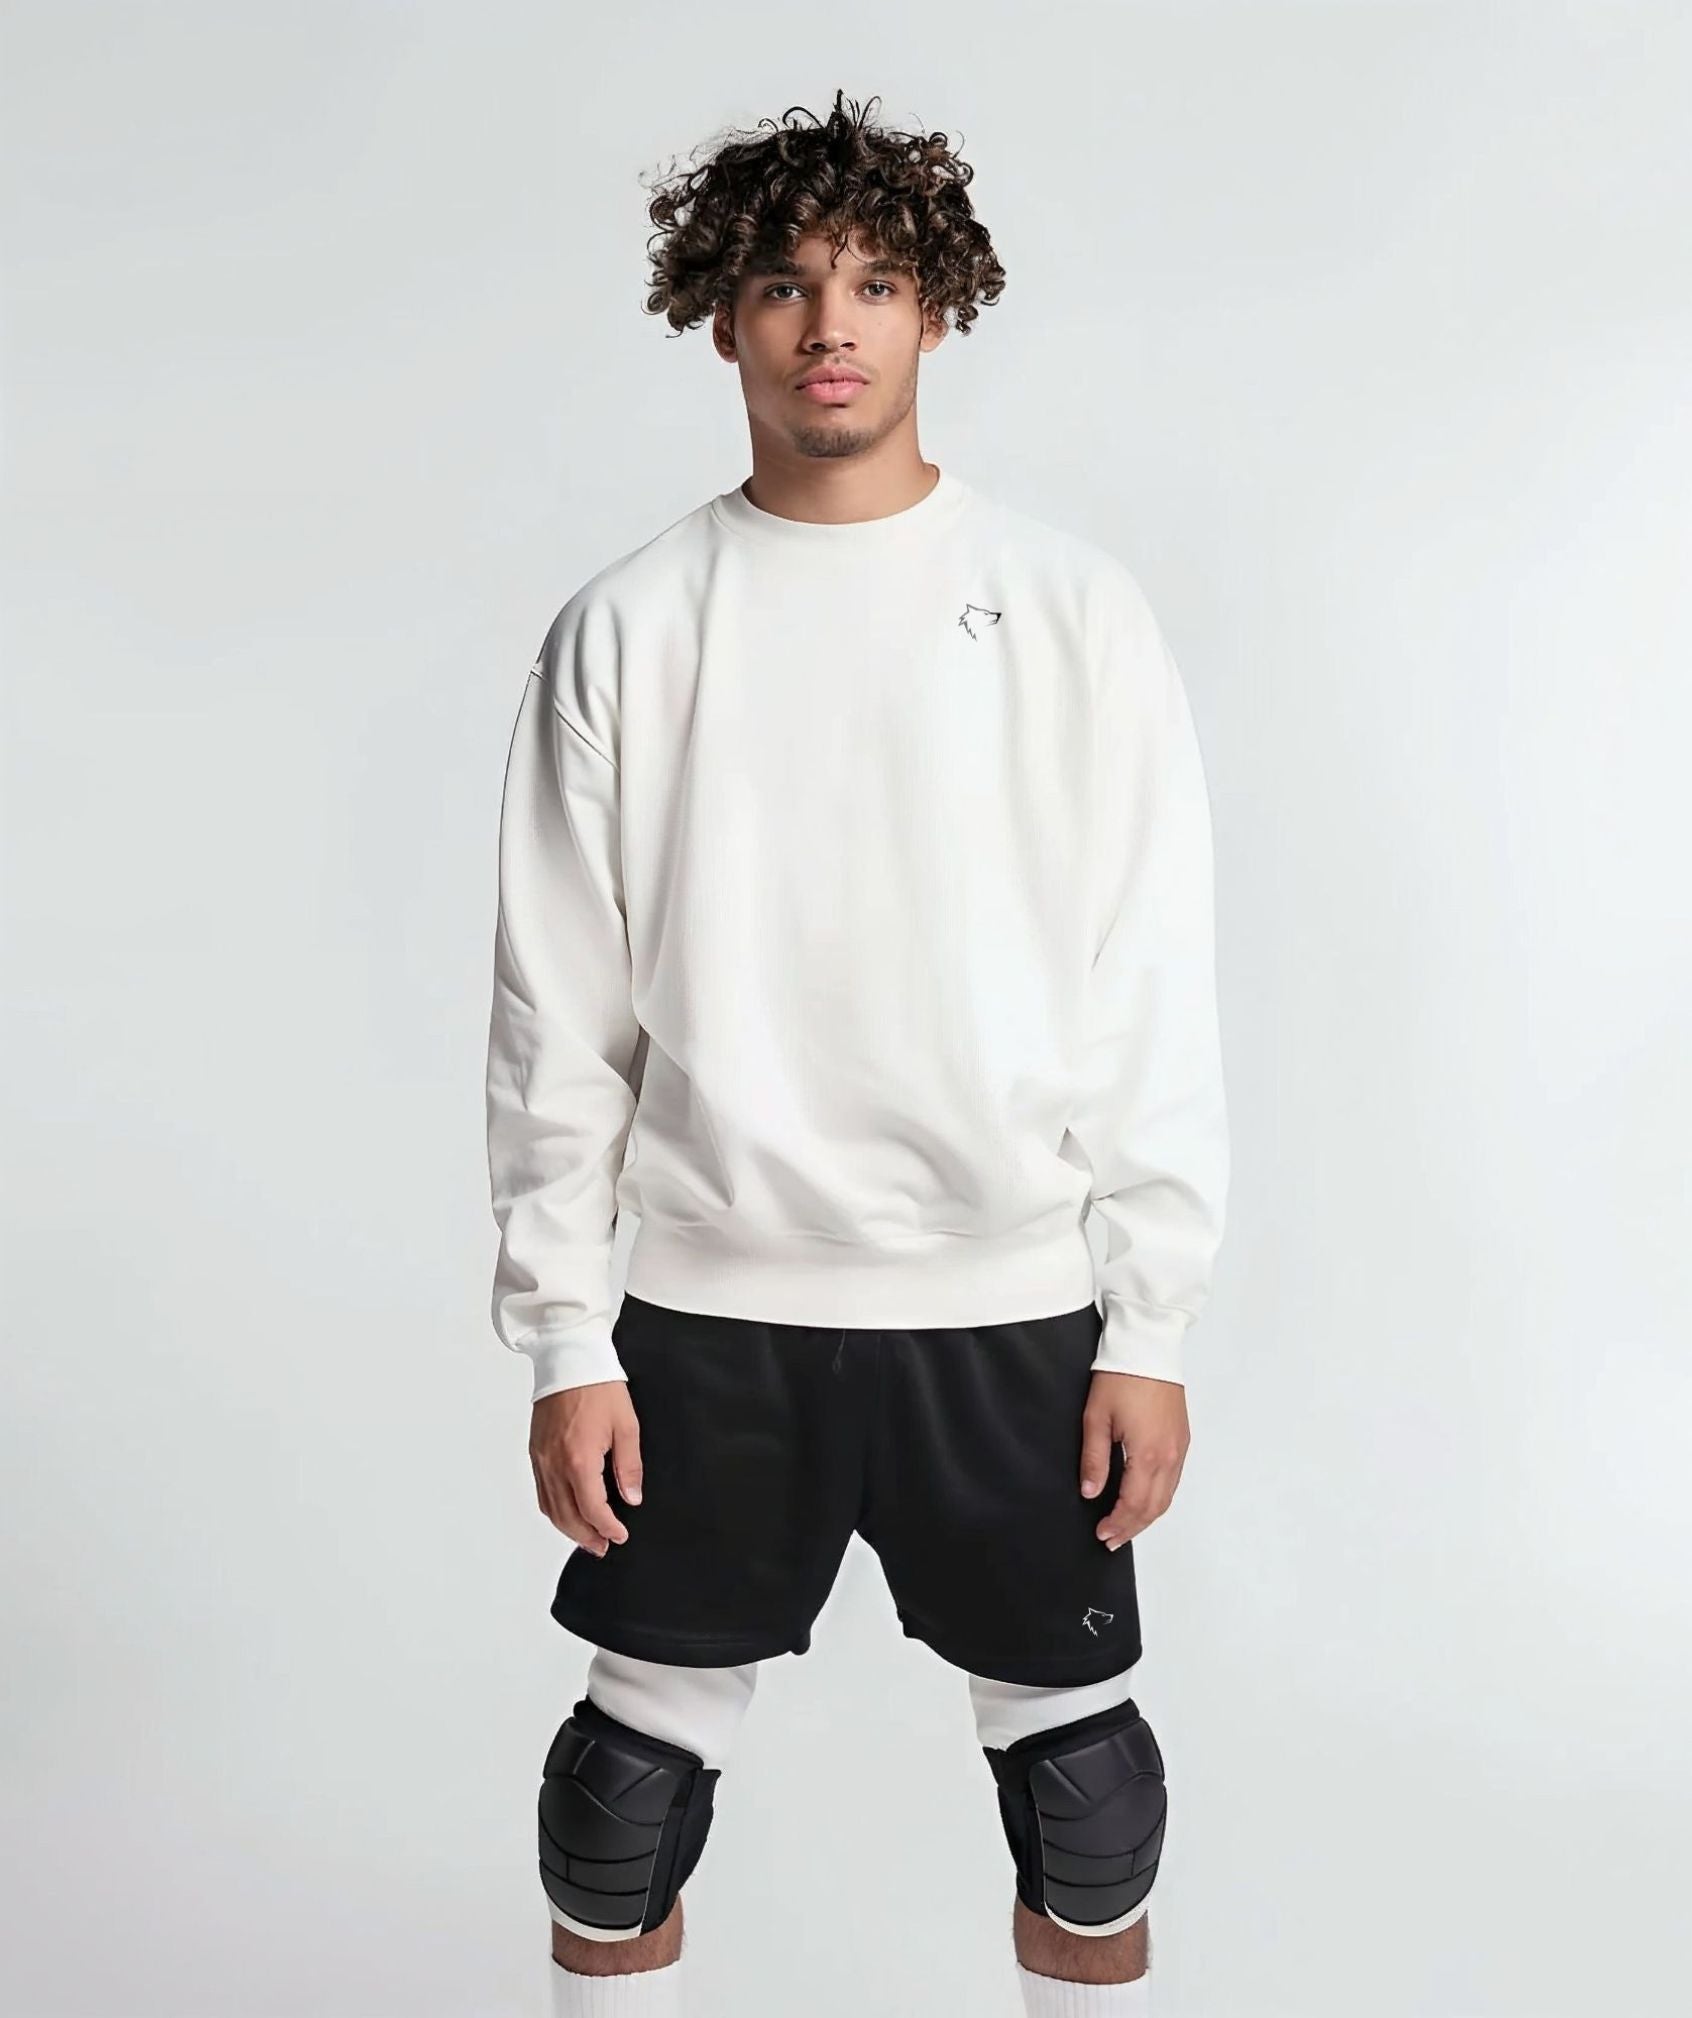 Apex™ white Alpha Fix sweatshirt front view - sustainable long sleeve